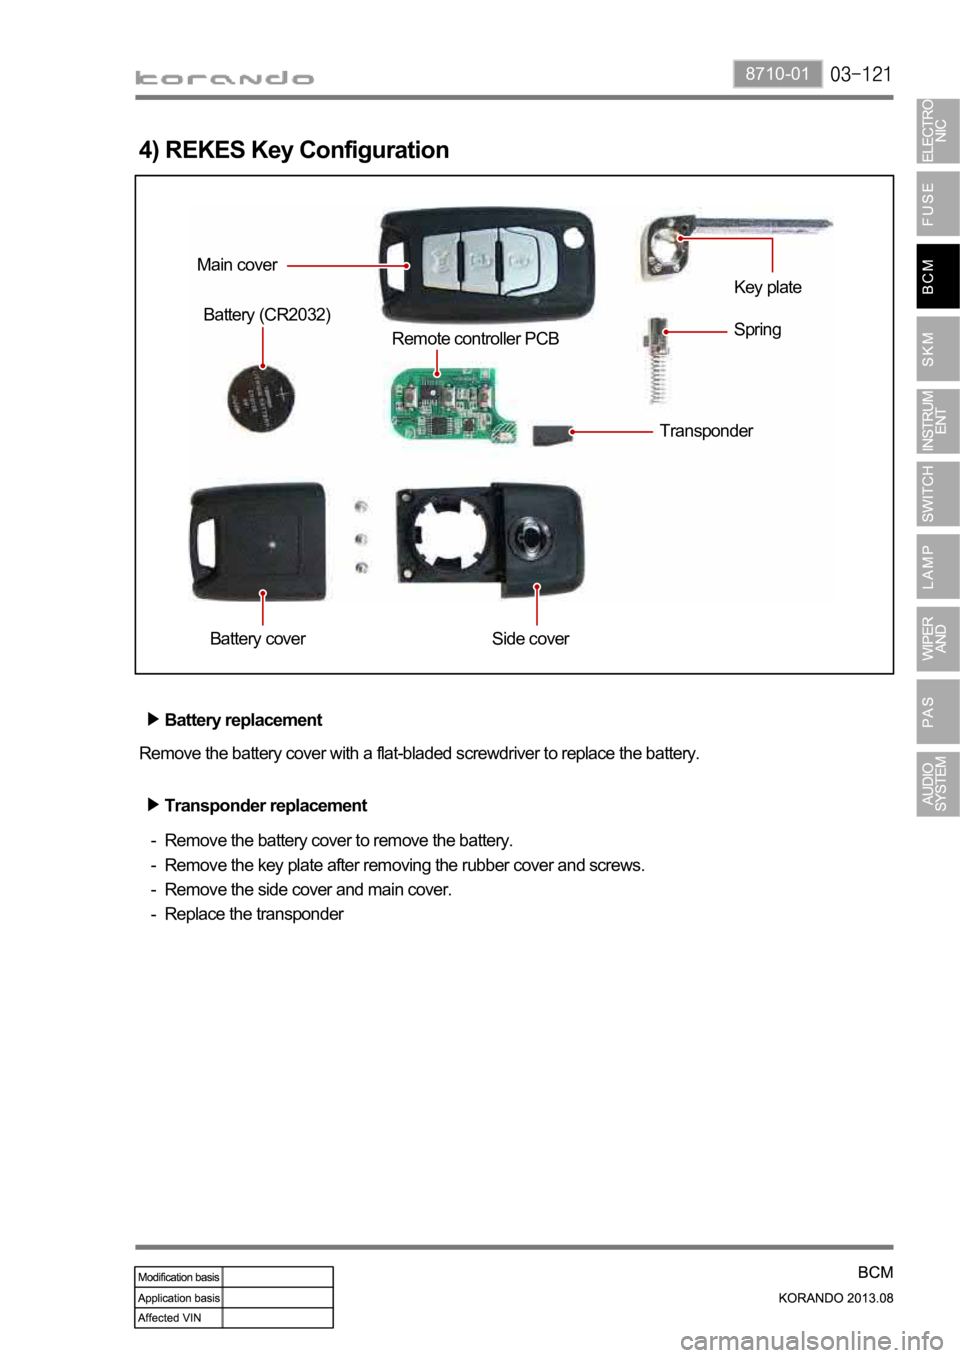 SSANGYONG KORANDO 2013  Service Manual 8710-01
4) REKES Key Configuration
Battery cover Side cover Battery (CR2032)
TransponderKey plate
Remote controller PCB
Battery replacement
Remove the battery cover with a flat-bladed screwdriver to r